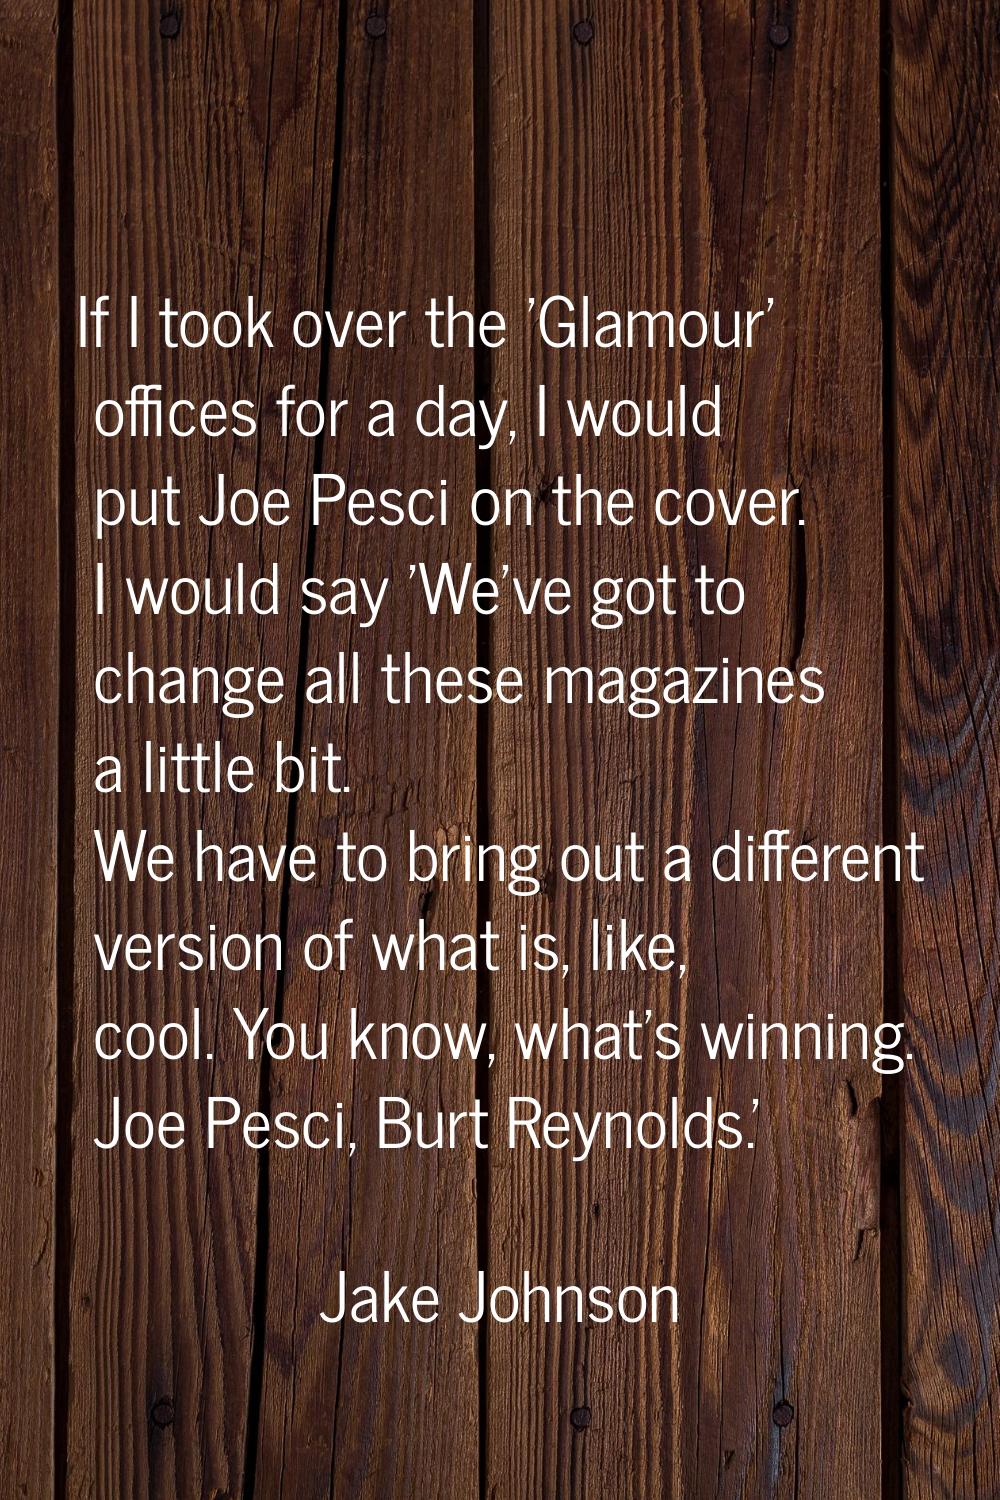 If I took over the 'Glamour' offices for a day, I would put Joe Pesci on the cover. I would say 'We